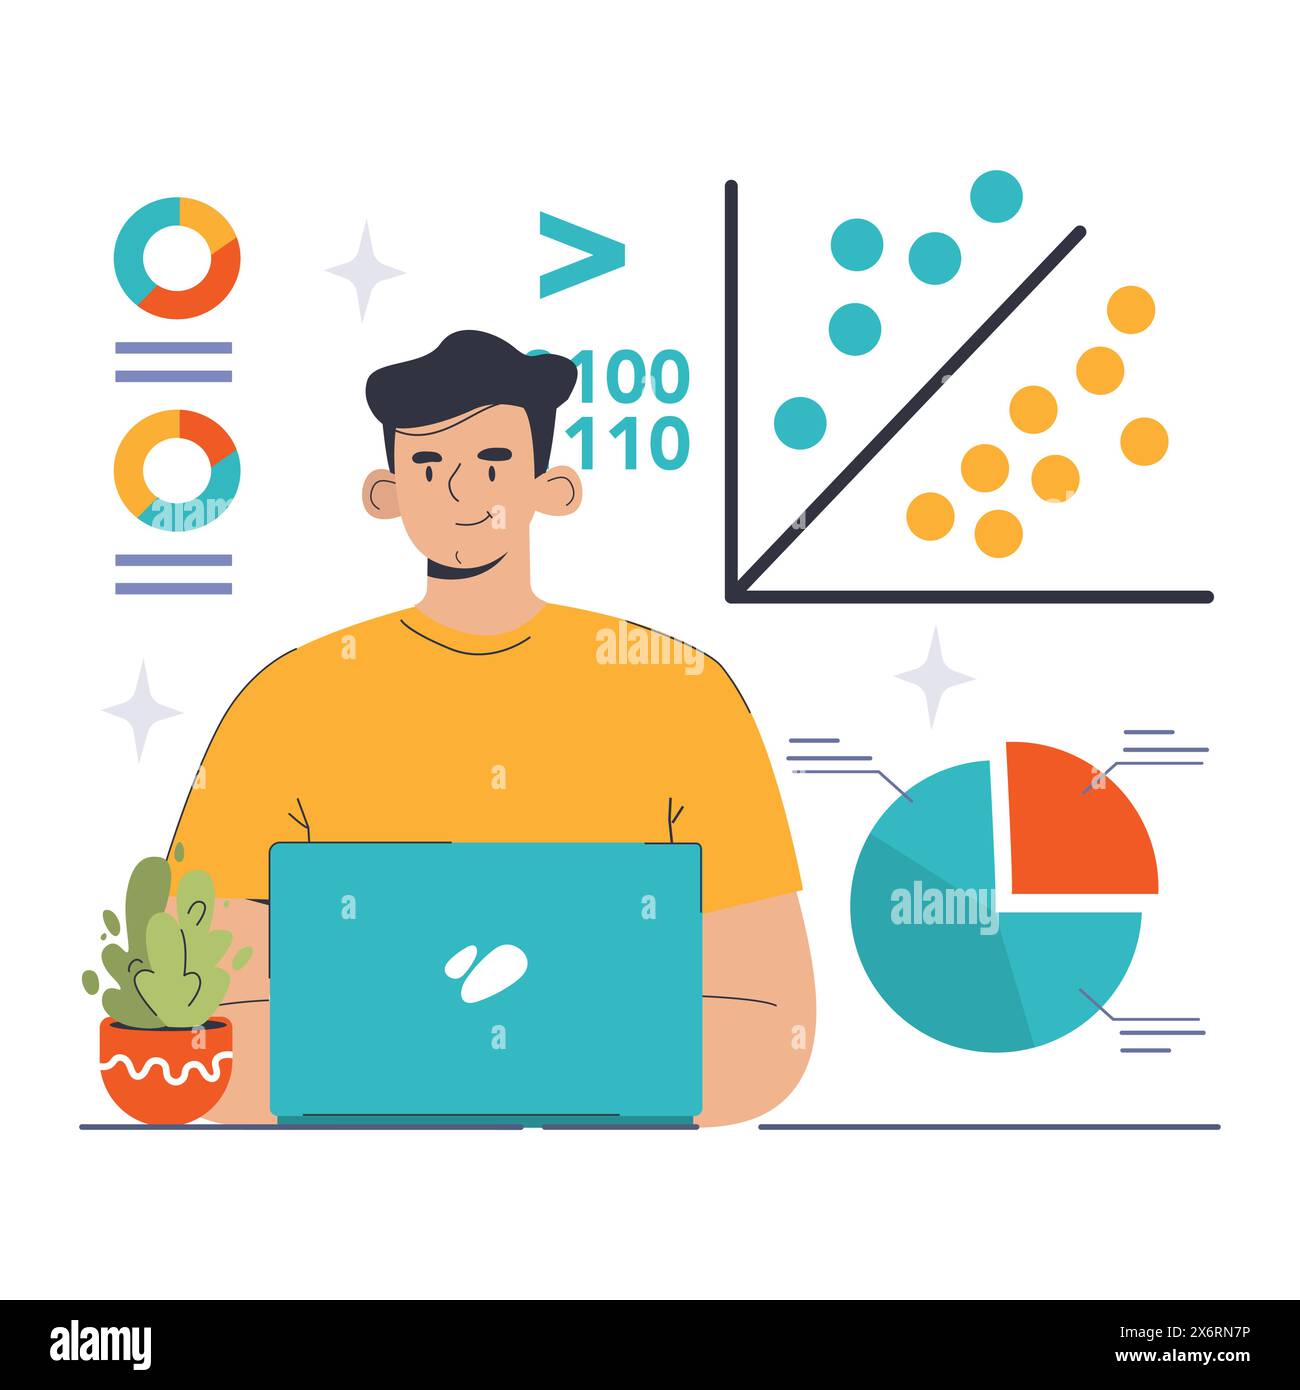 Supervised Learning concept. A focused man engages with machine learning algorithms on his laptop, amidst graphics depicting data classification. Flat vector illustration Stock Vector